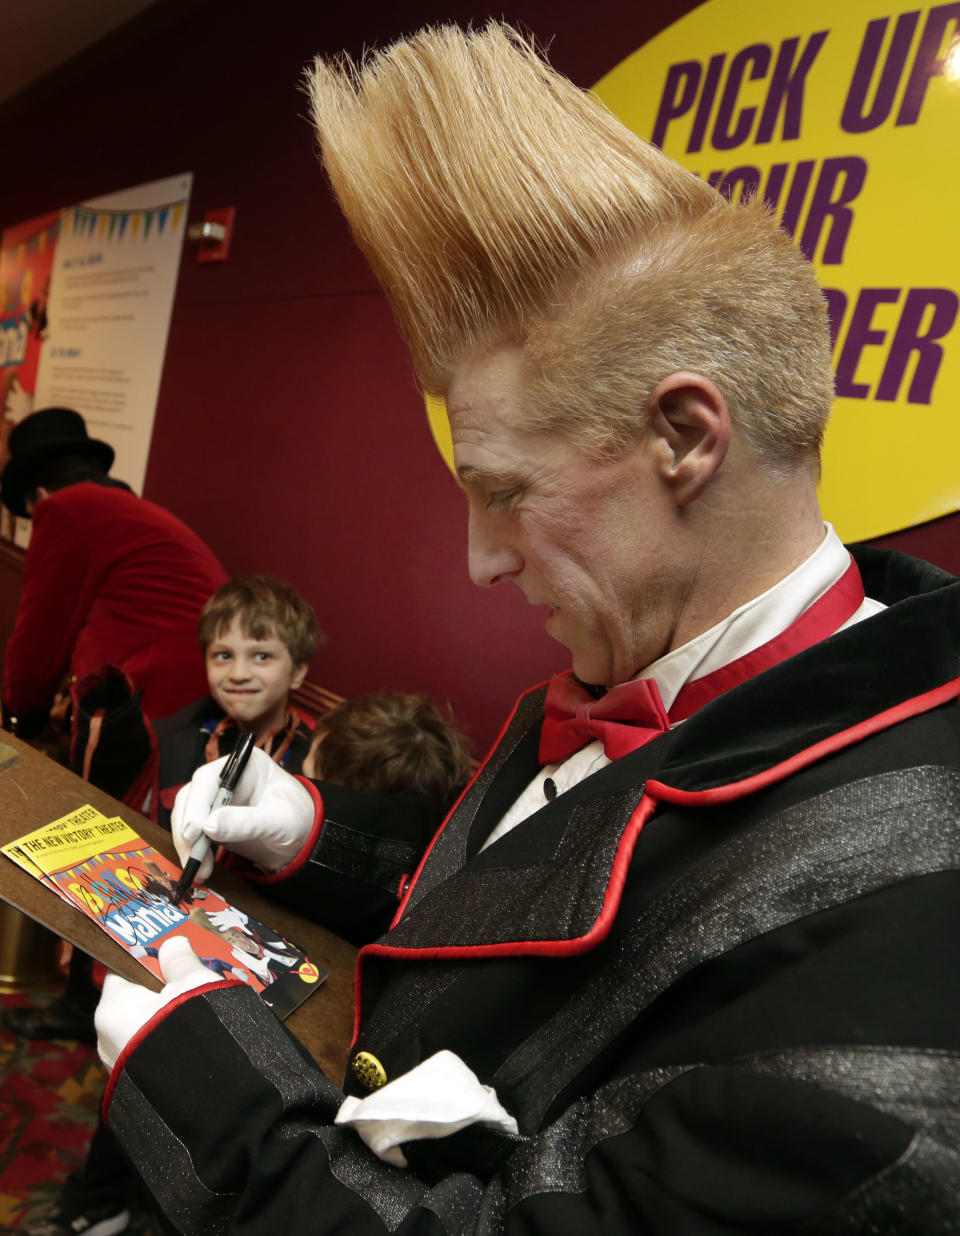 This March 23, 2013 photo shows performer Bello Nock signing autographs in the lobby of the New Victory Theater, after his "Bello Mania" show, in New York. Nock, a seventh-generation circus performer, is never offstage during the 90-minute performance, which combines slapstick clowning with death-defying aerial stunts. He performs through March 31 at the New Victory before moving on to the Canadian side of Niagara Falls and then a 10-week stint at the Beau Rivage Casino in Biloxi, Miss. (AP Photo/Richard Drew)